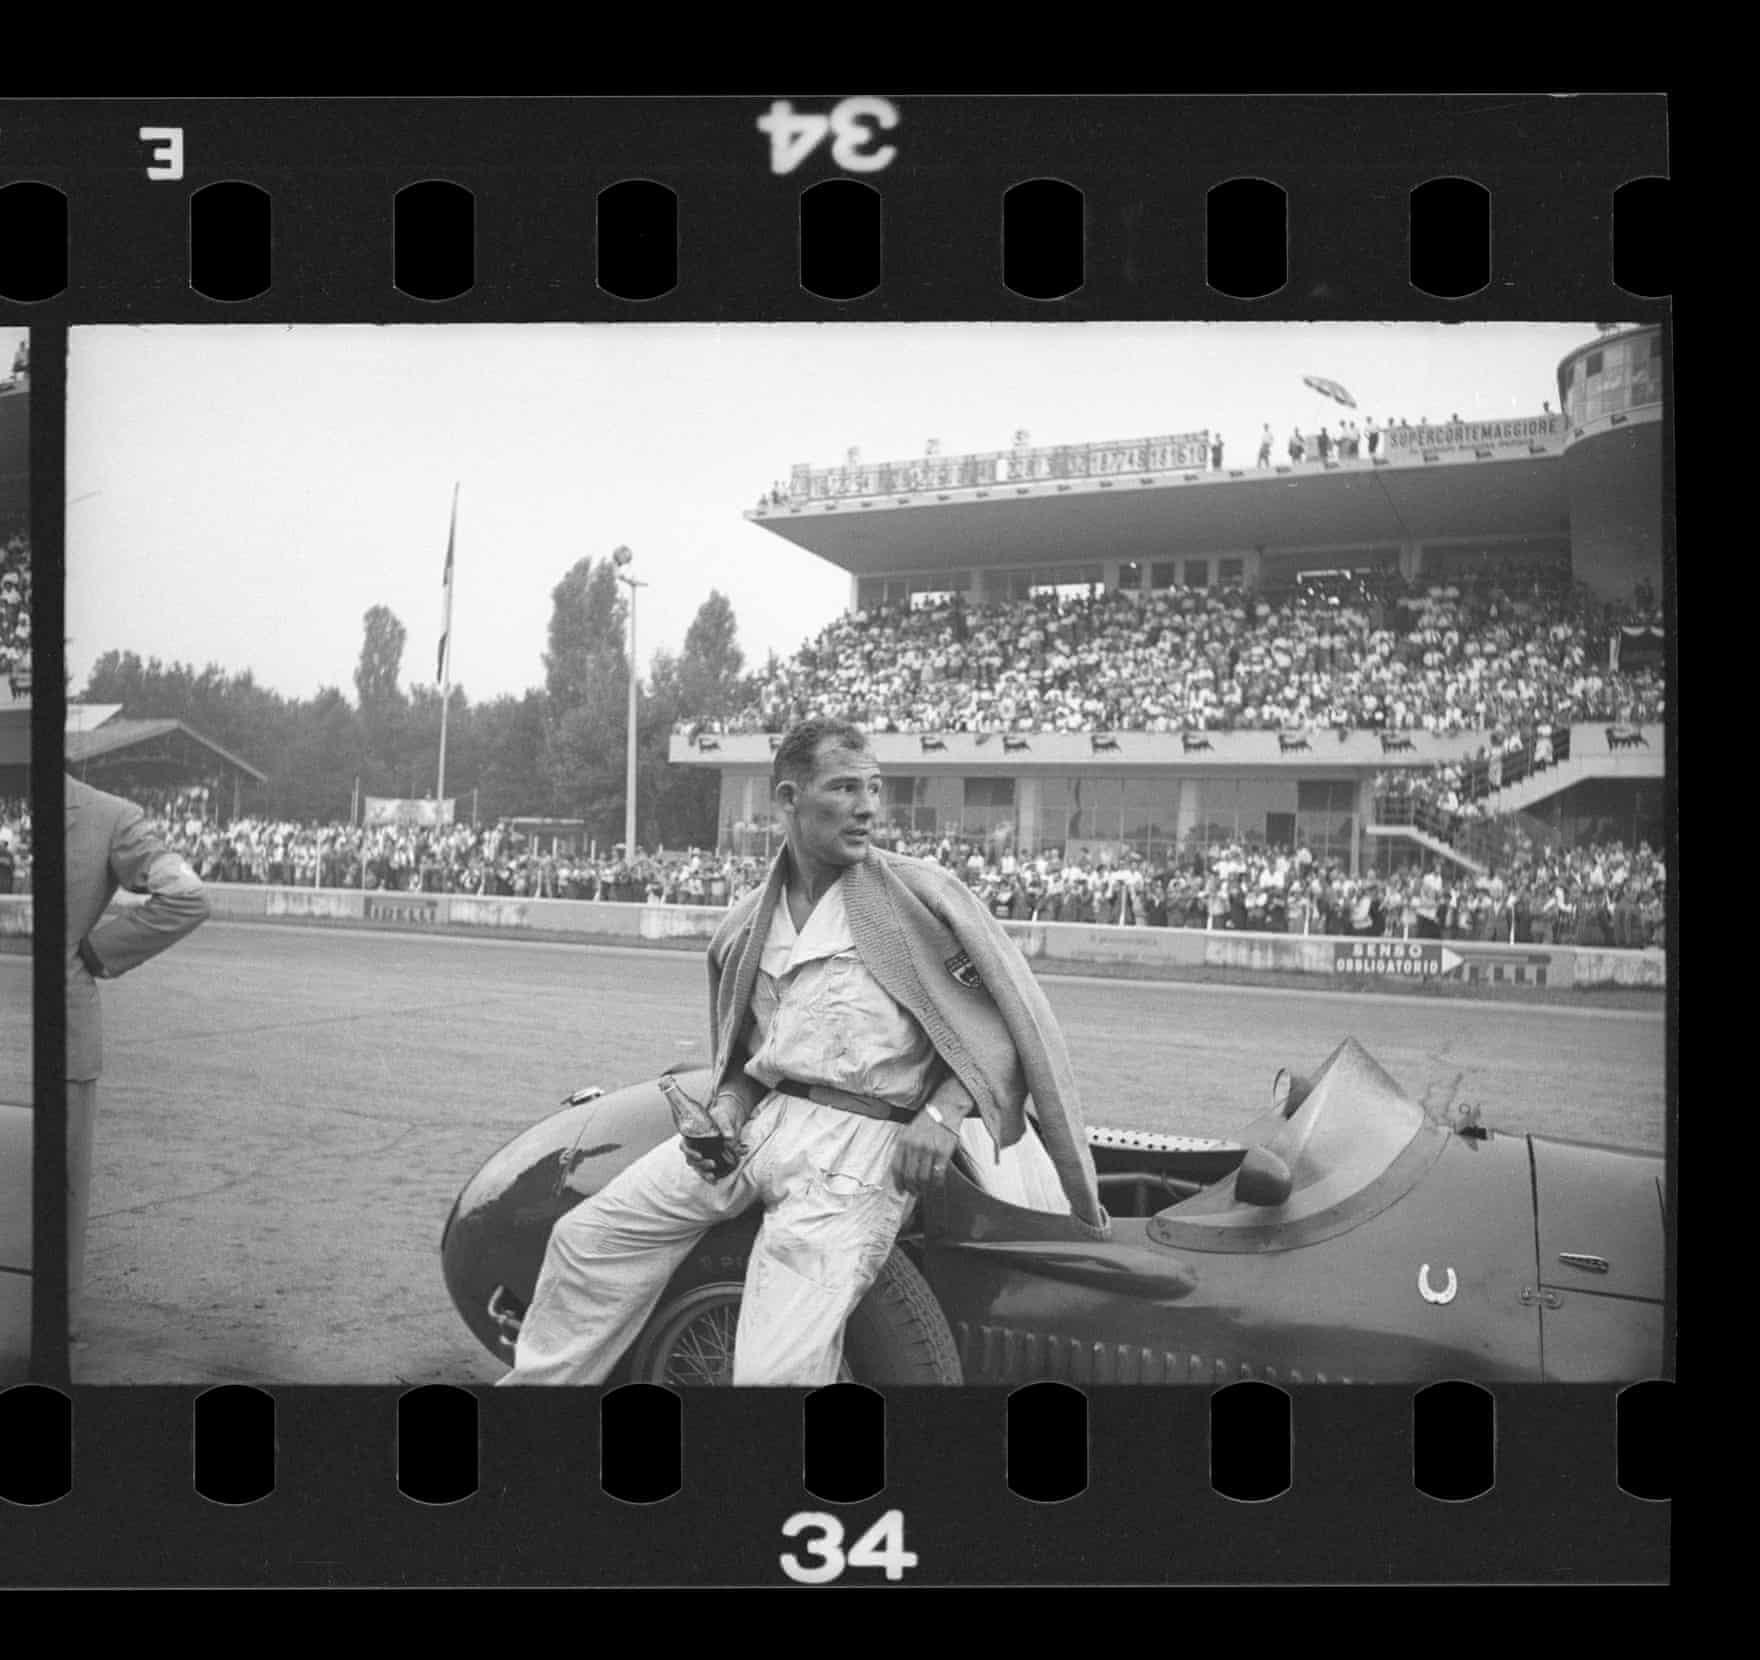 Moss drinks cola in the pits, after pushing his car past the finish line at the 1954 Italian Grand Prix.